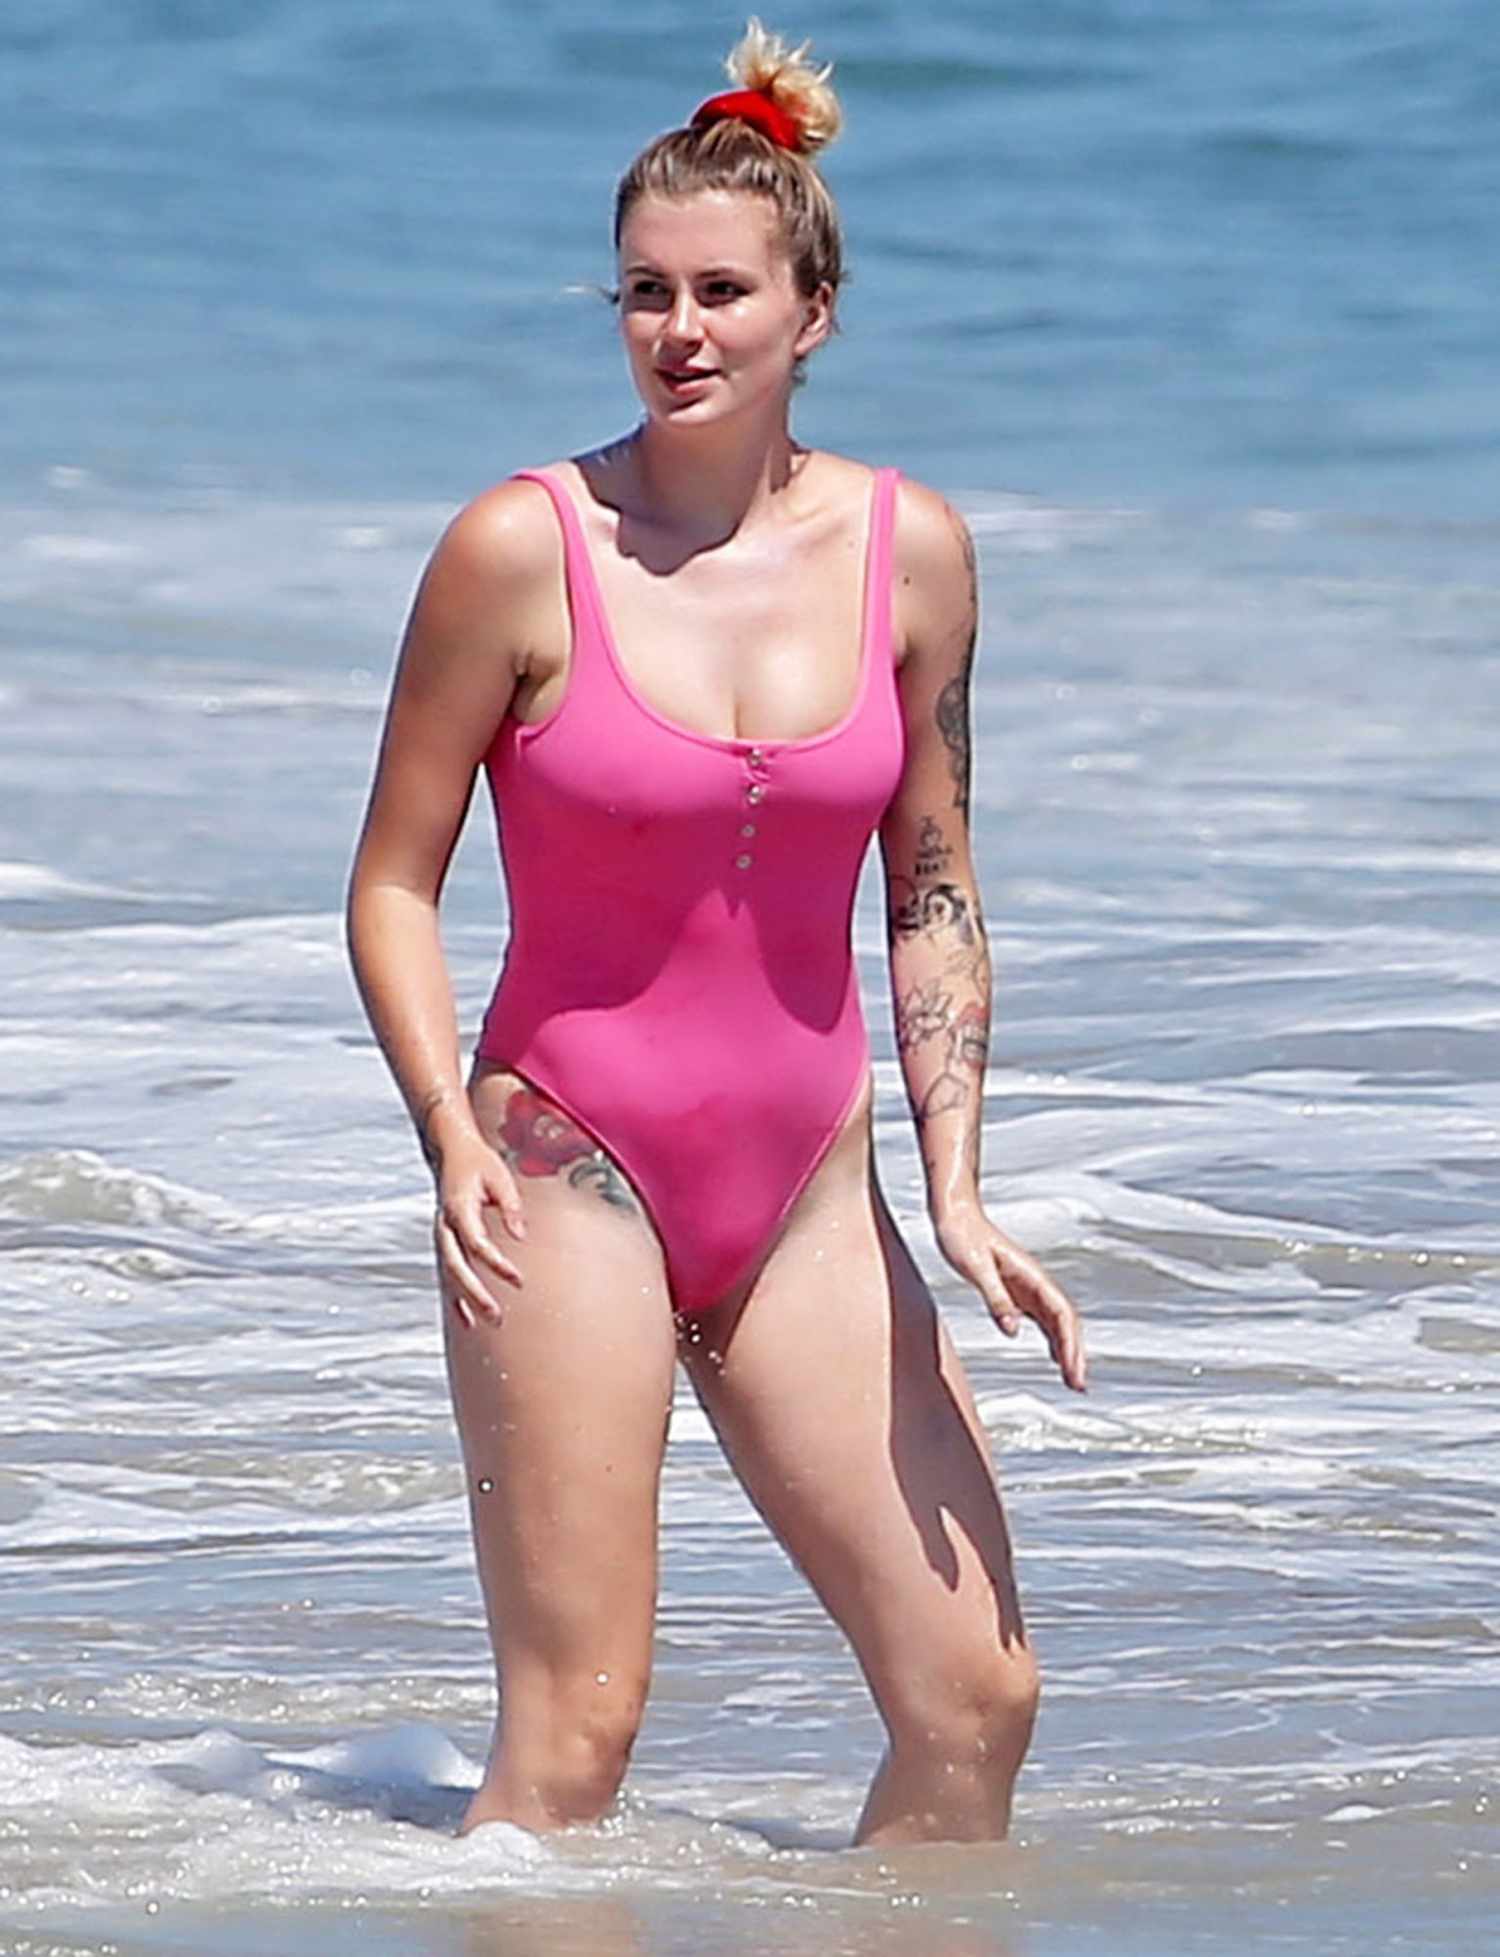 Ireland Baldwin wears a pink one-piece bathing suit while at the beach in Malibu